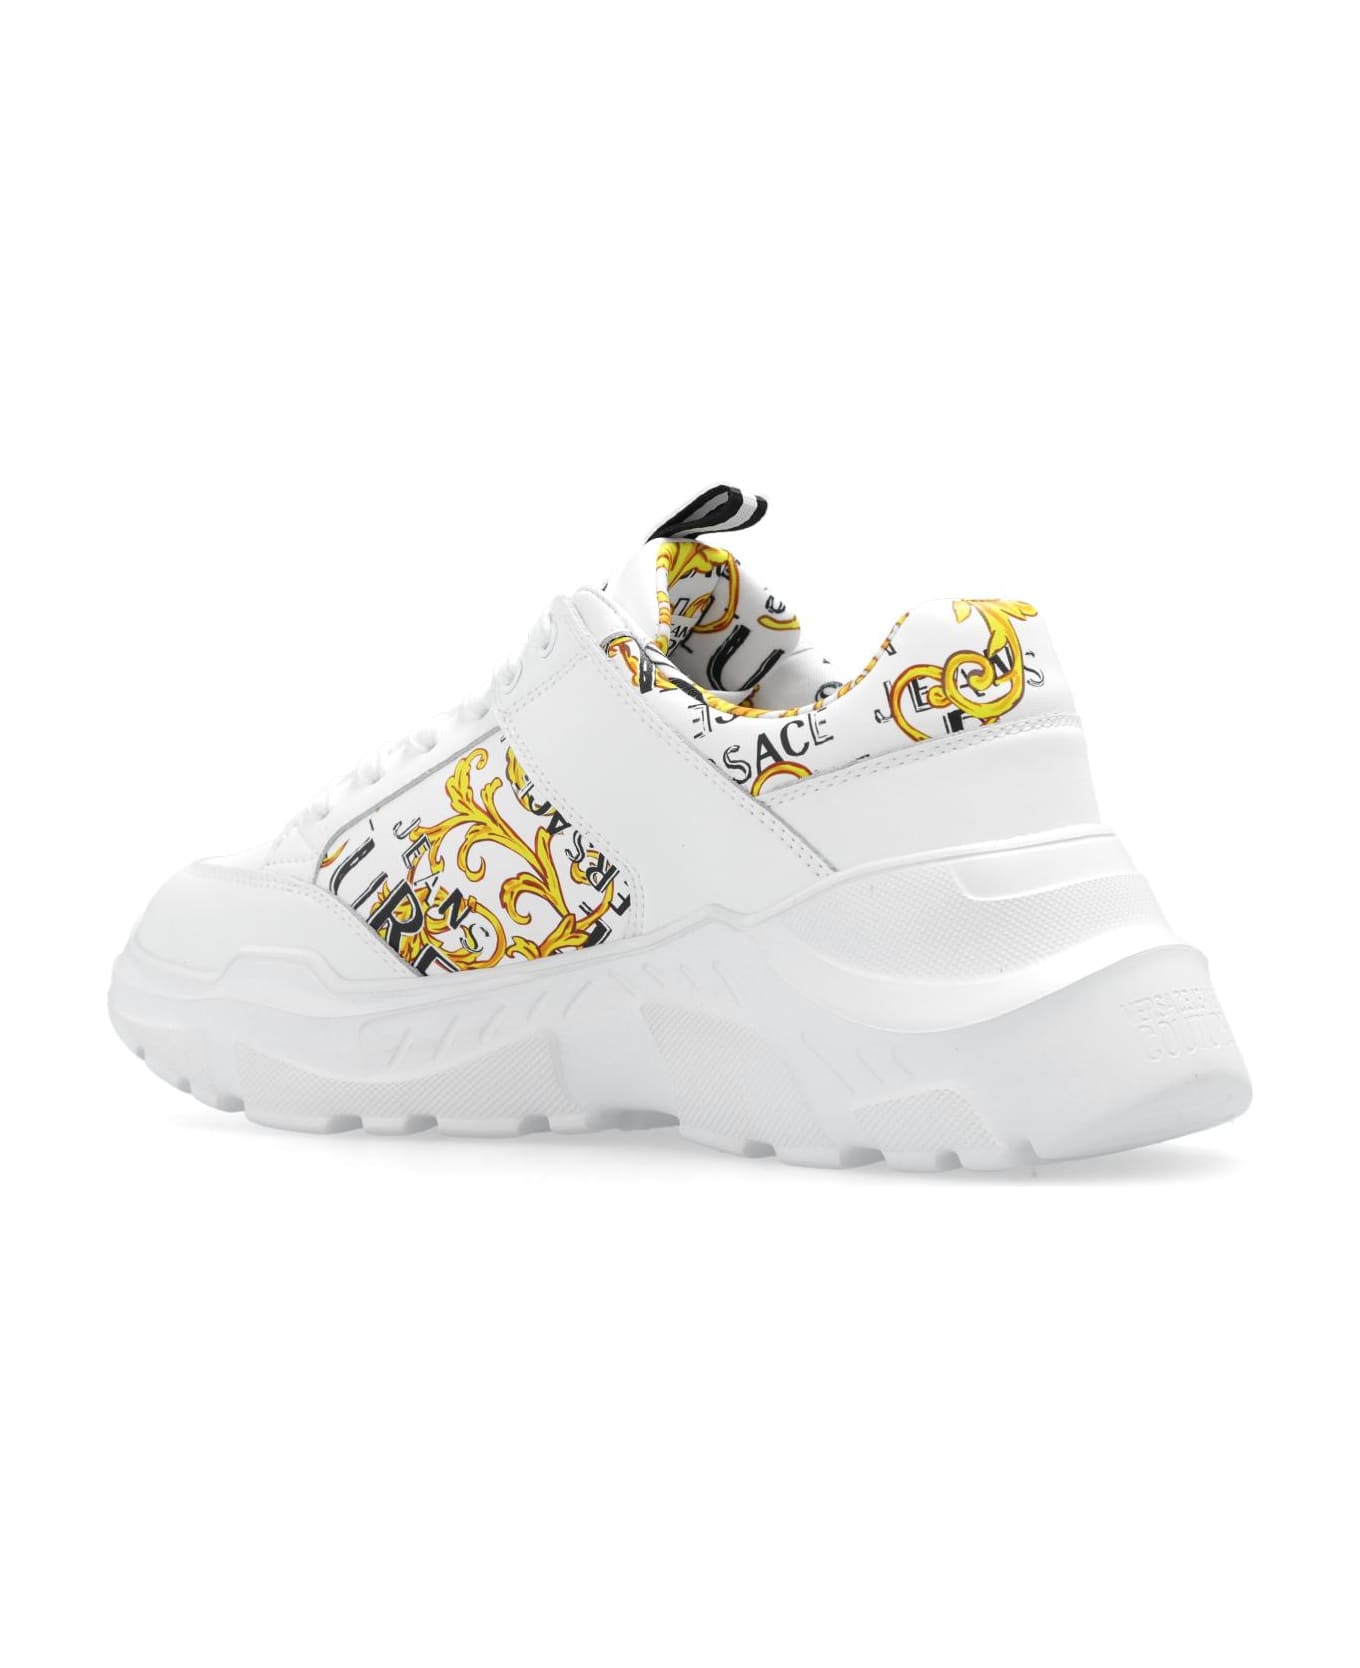 Versace Jeans Couture Printed Sneakers - White